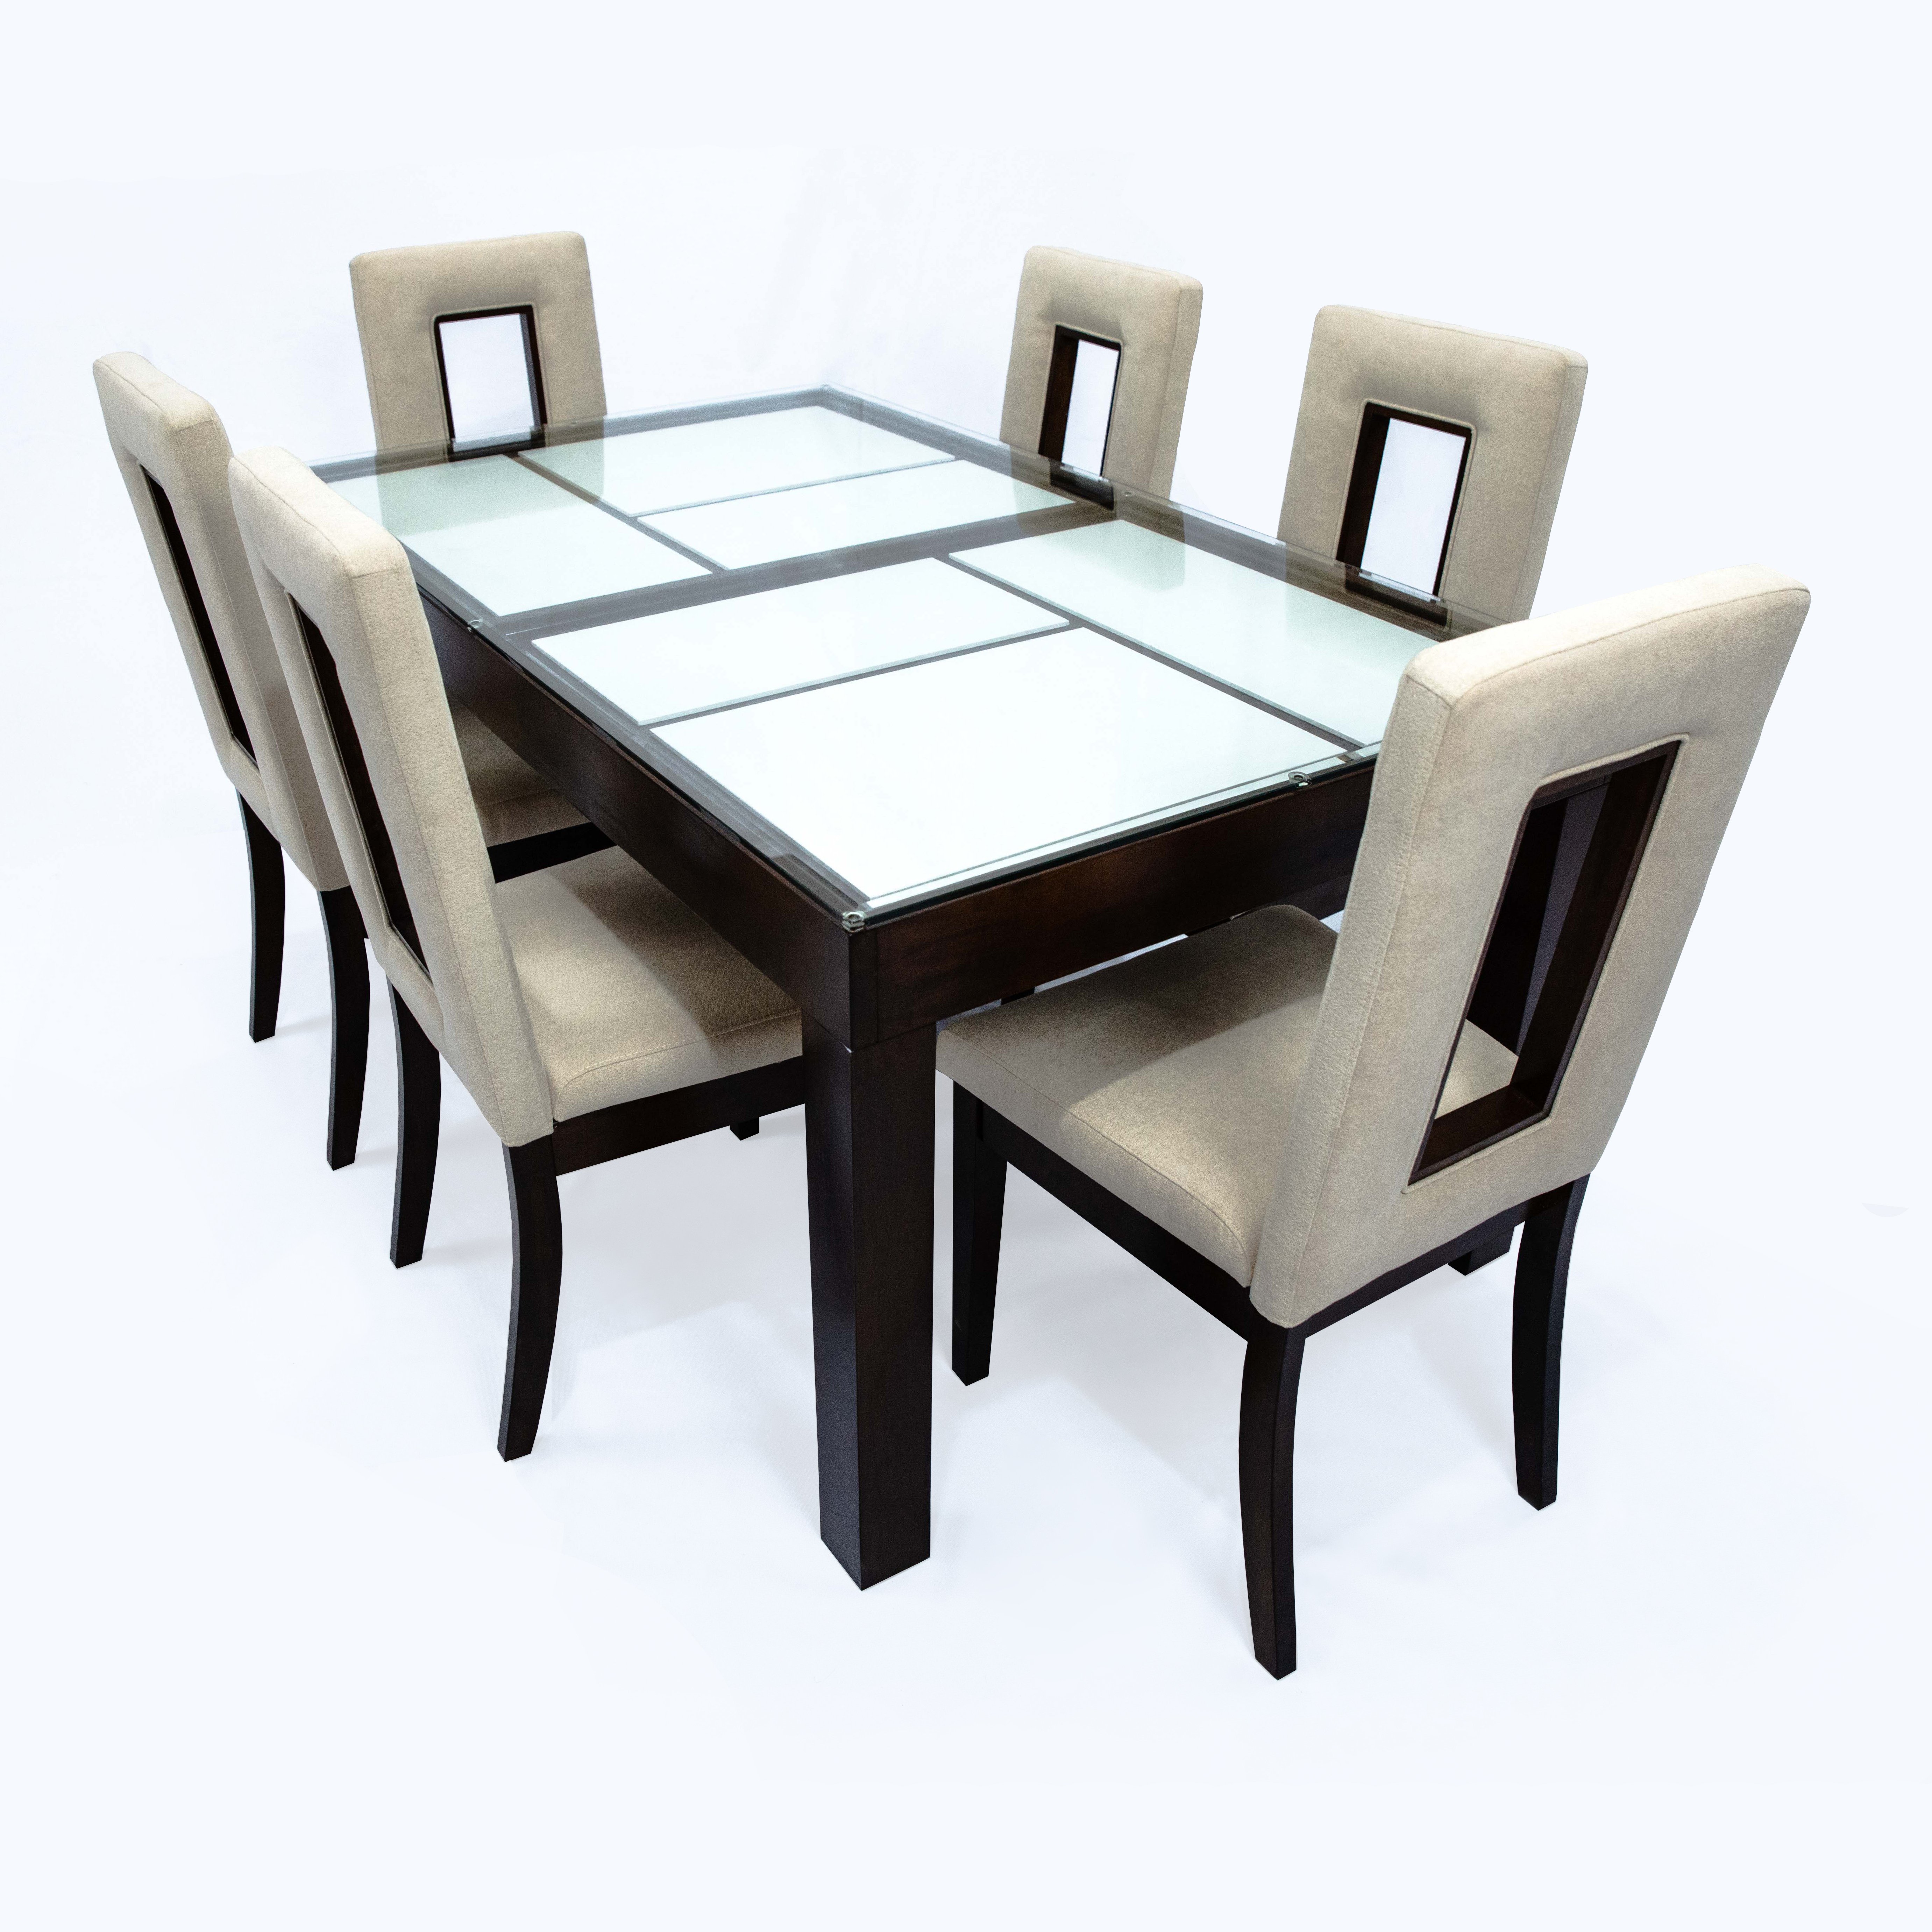 6 Seater Dining Table (Trystan) - Home Style Depot